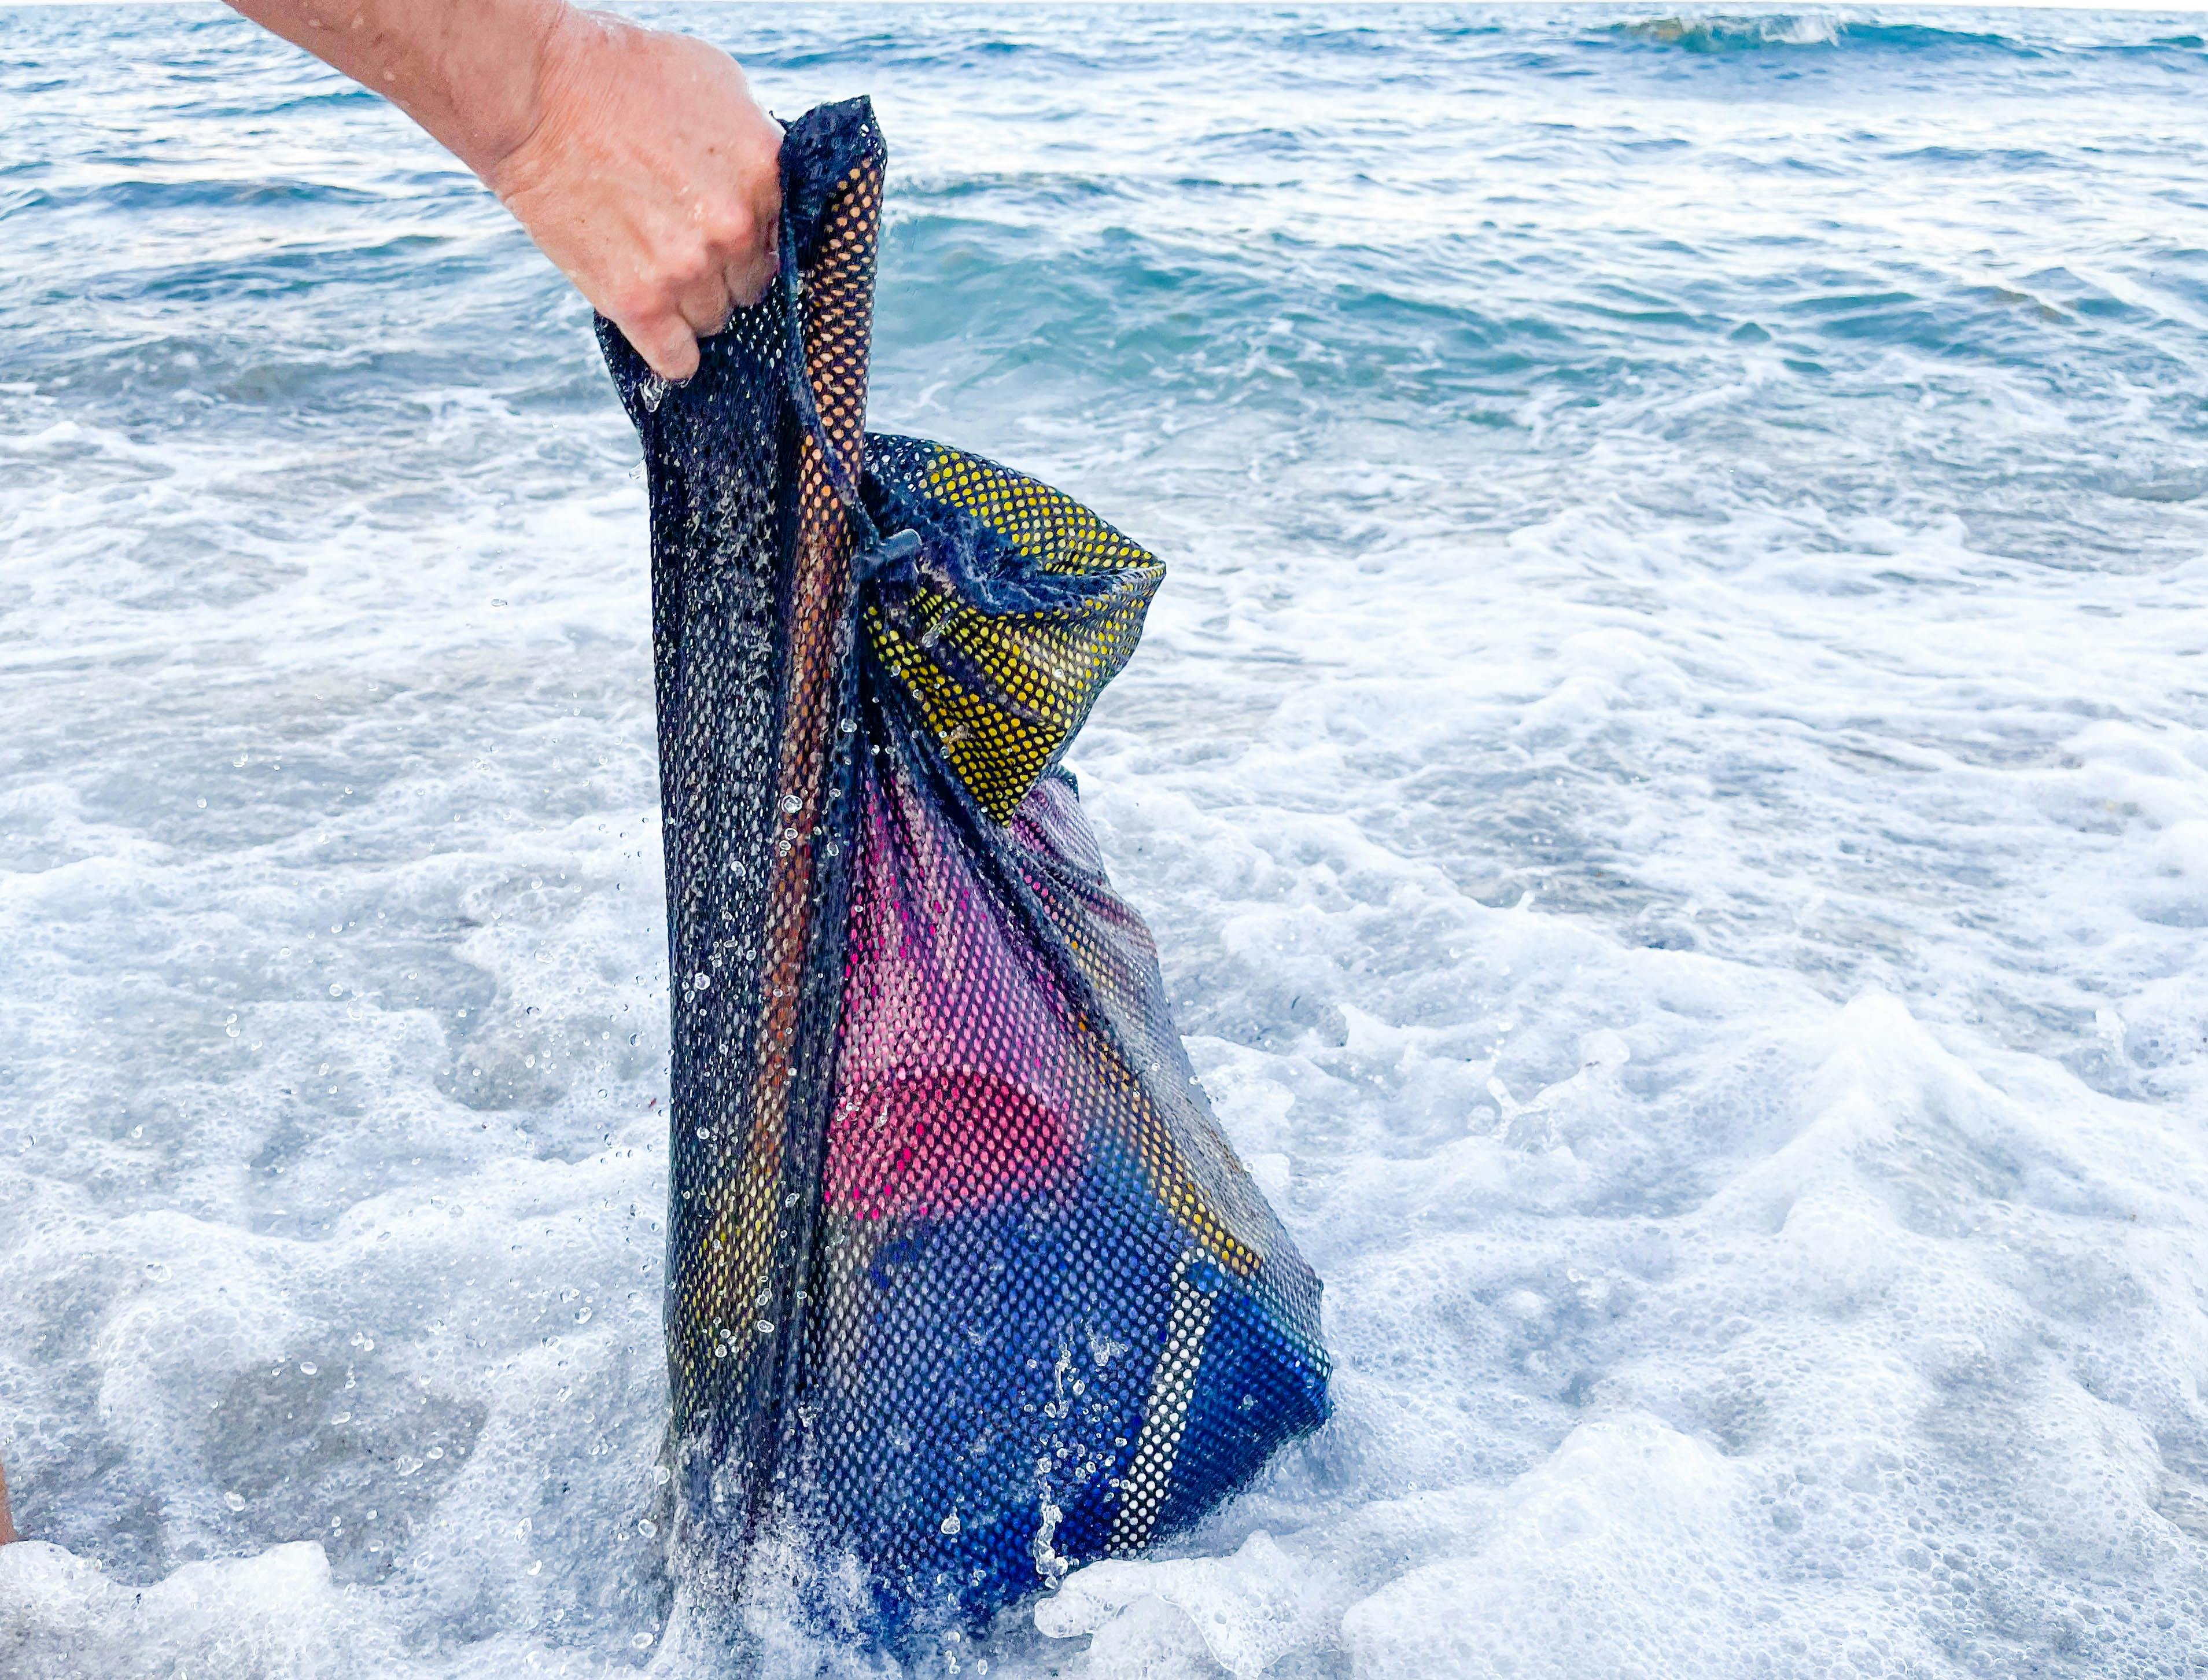 mesh bag with sand toys being washed in the ocean water